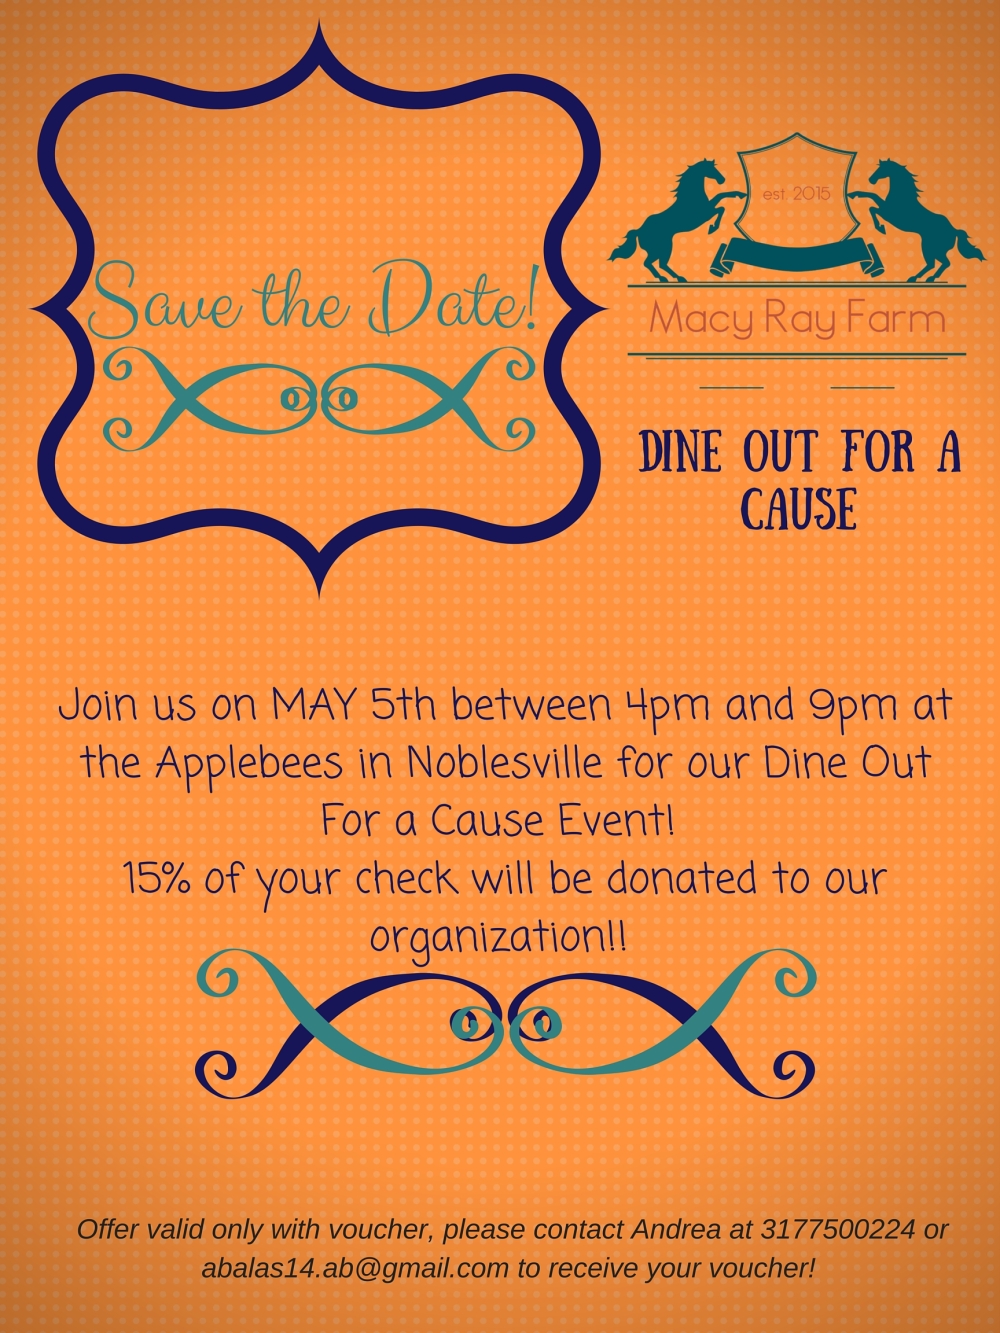 Dine Out For a Cause